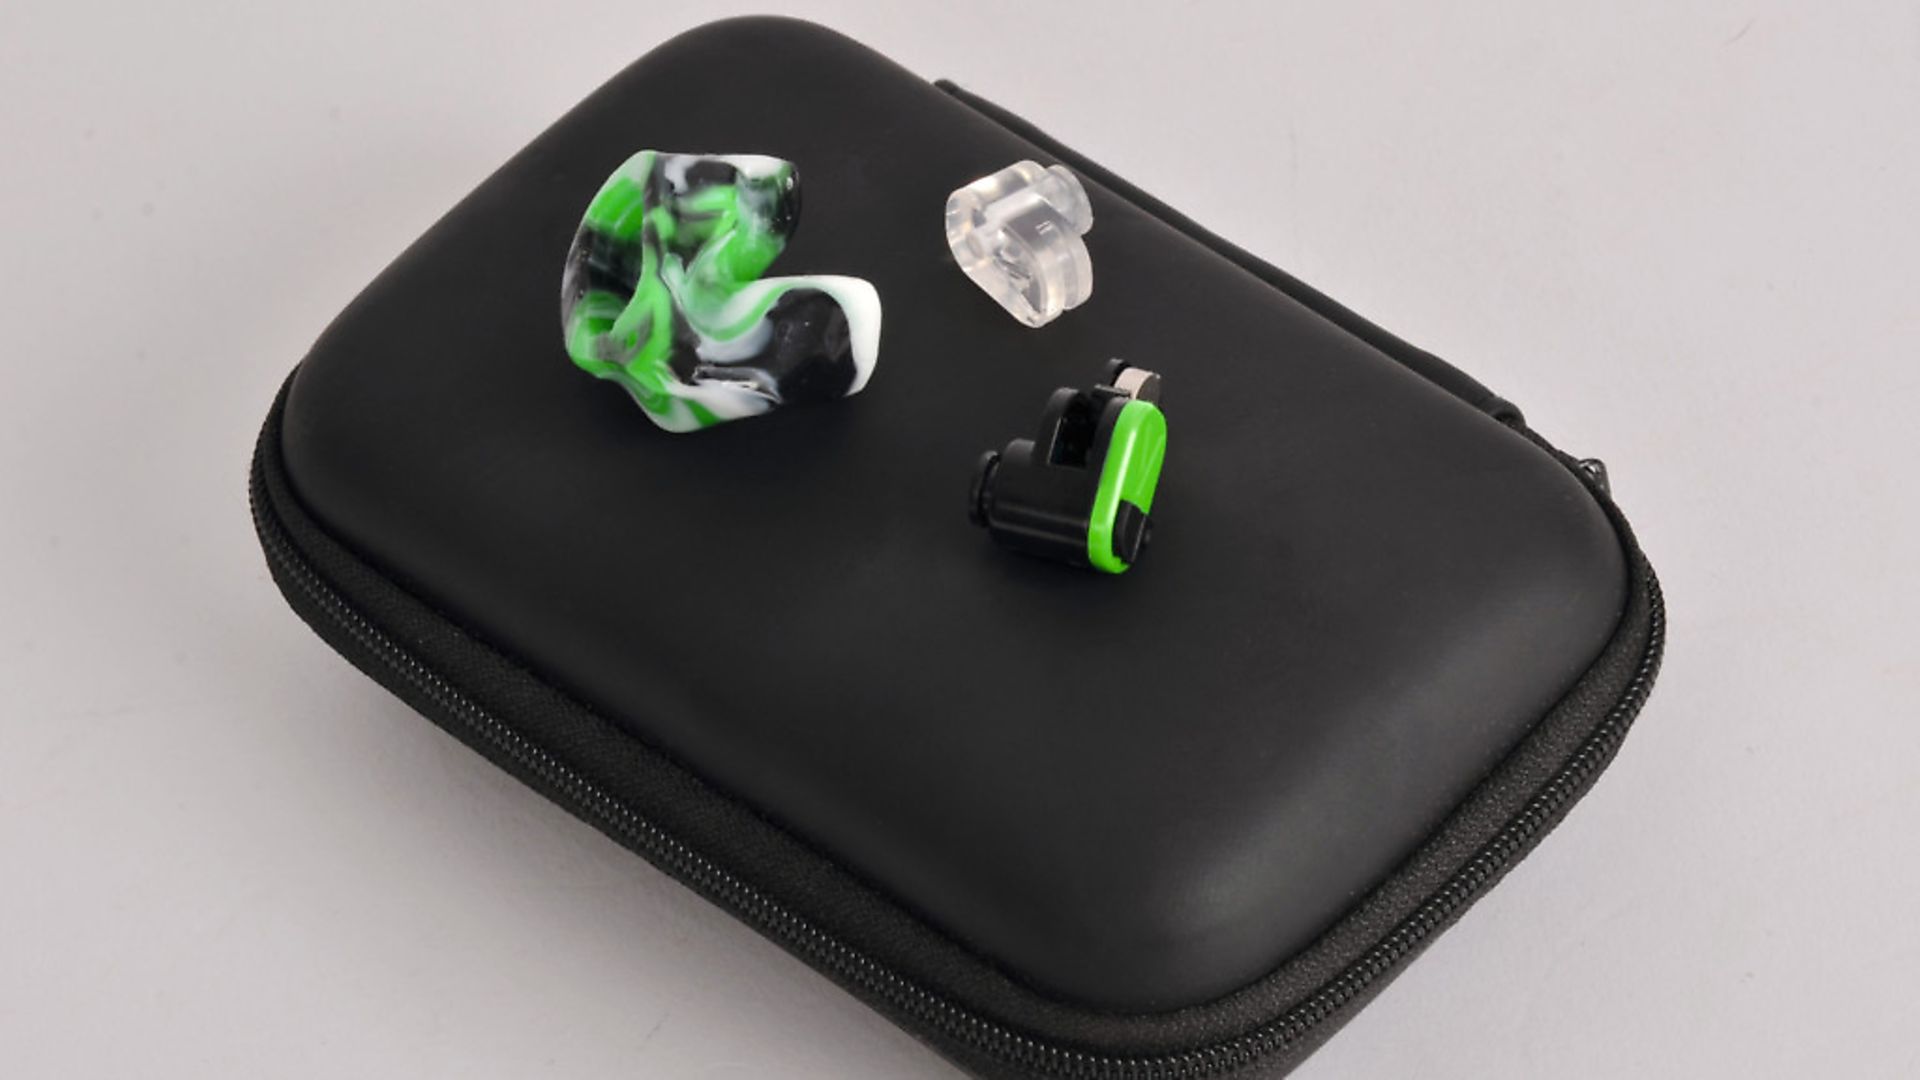 Hearing Aid Battery Tester - EAR Customized Hearing Protection